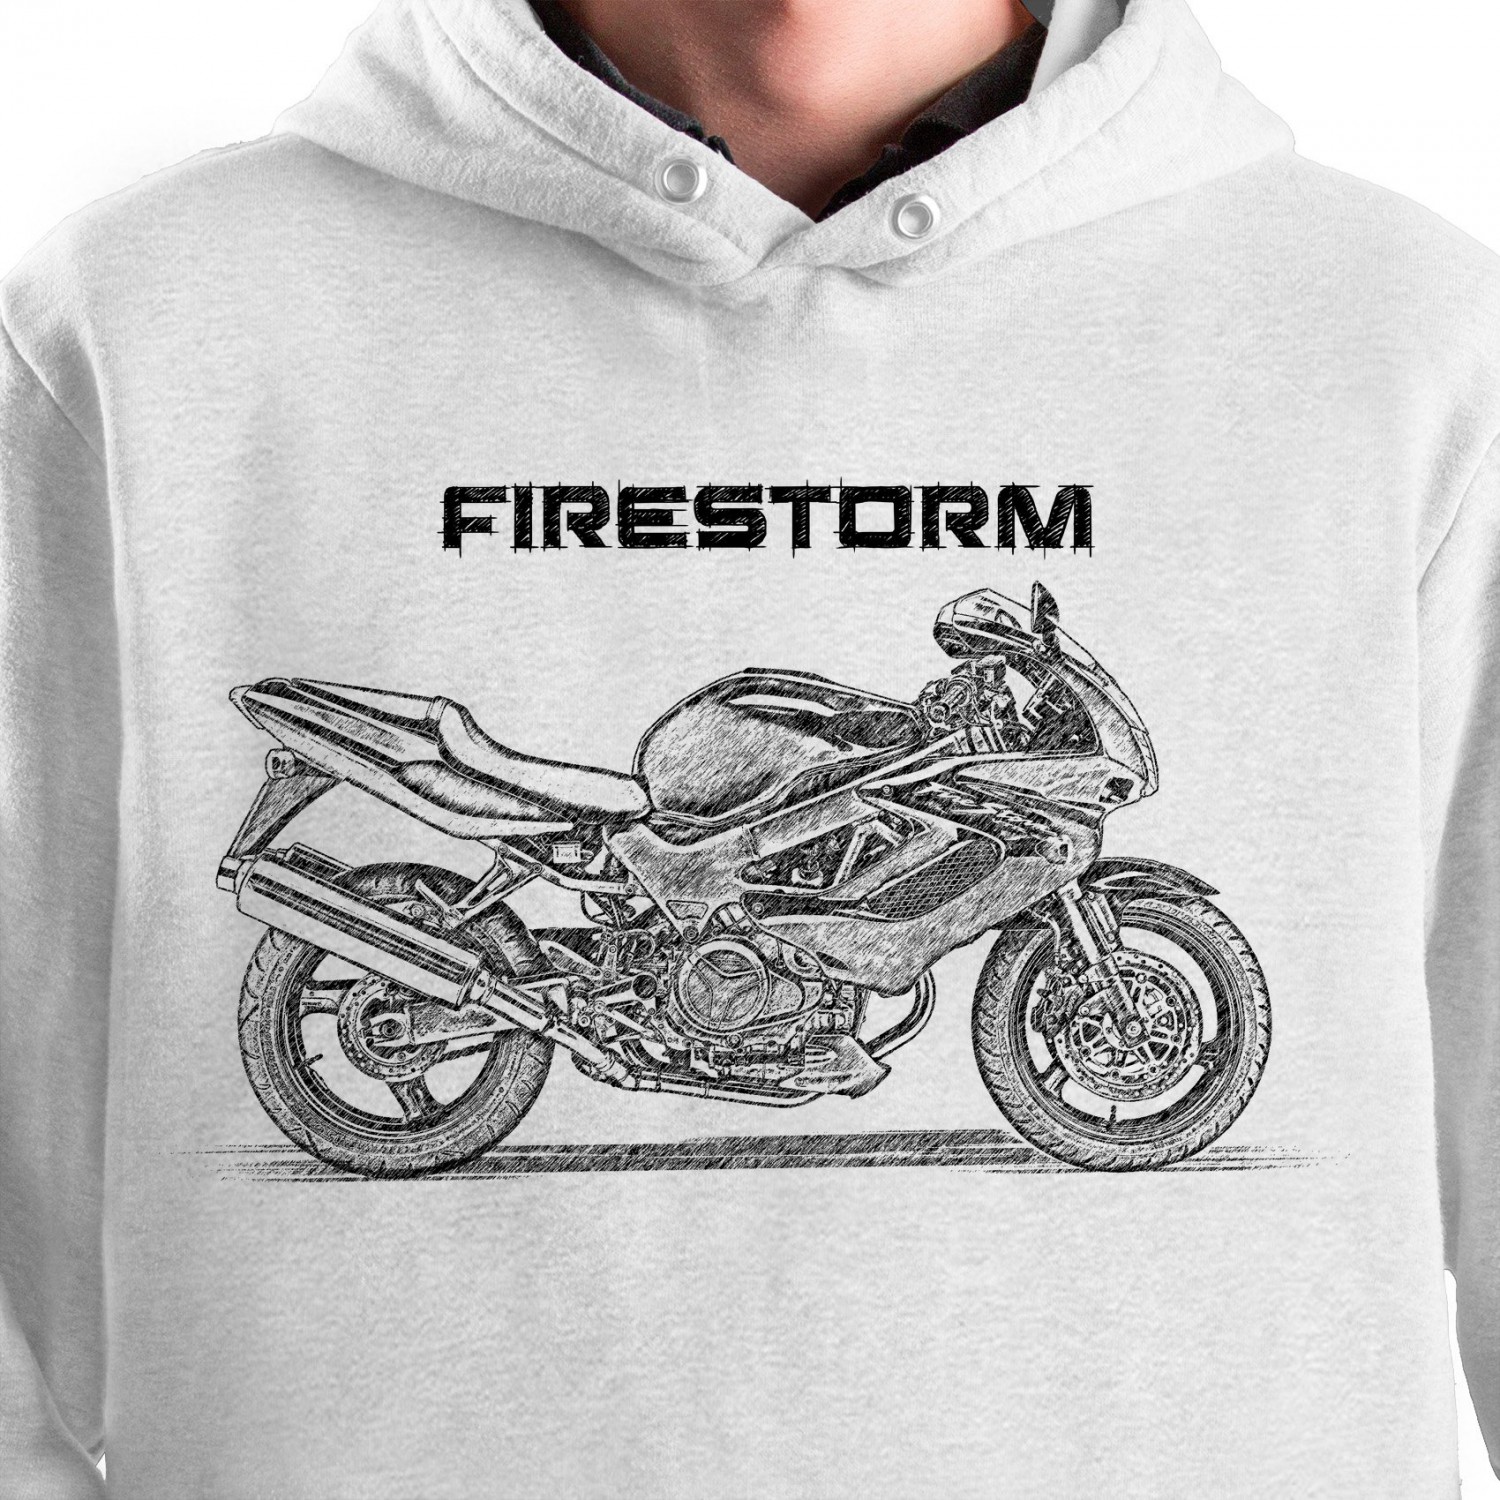 White T-shirt with Honda VTR 1000F Firestorm. Gift for motorcyclist.